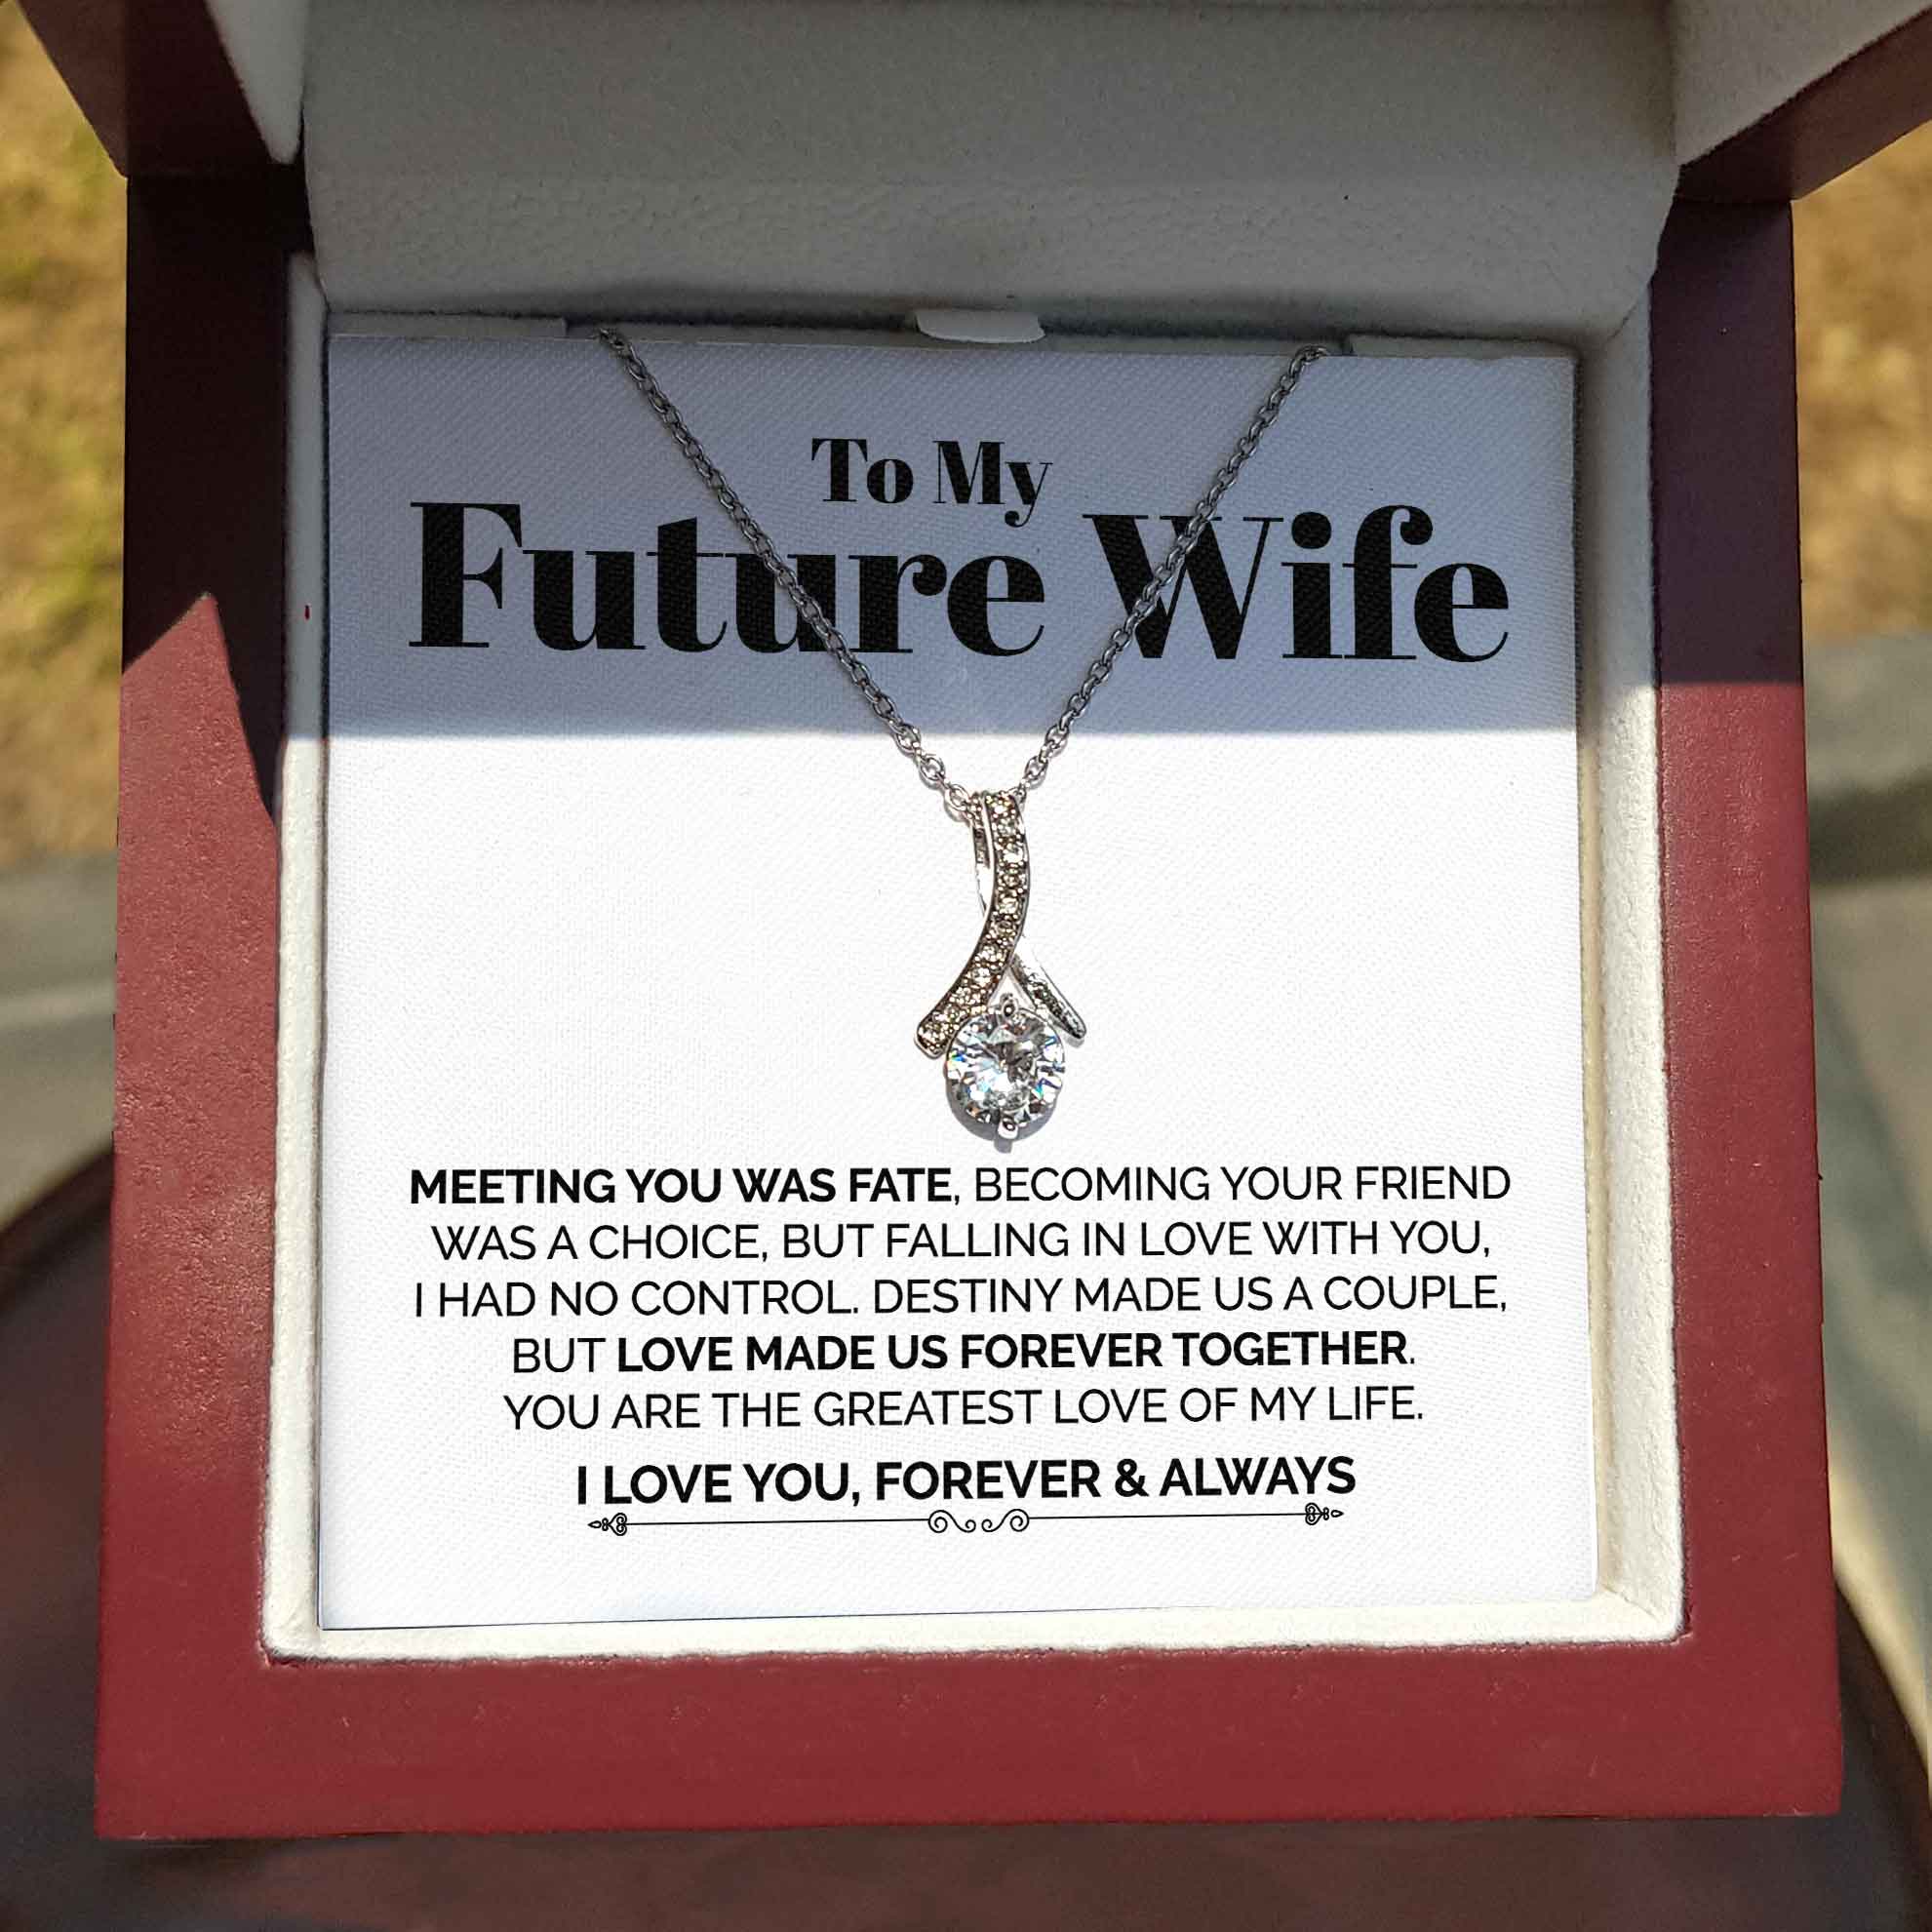 ShineOn Fulfillment Jewelry To My Future Wife - Love Made Us Forever Together - Ribbon Necklace